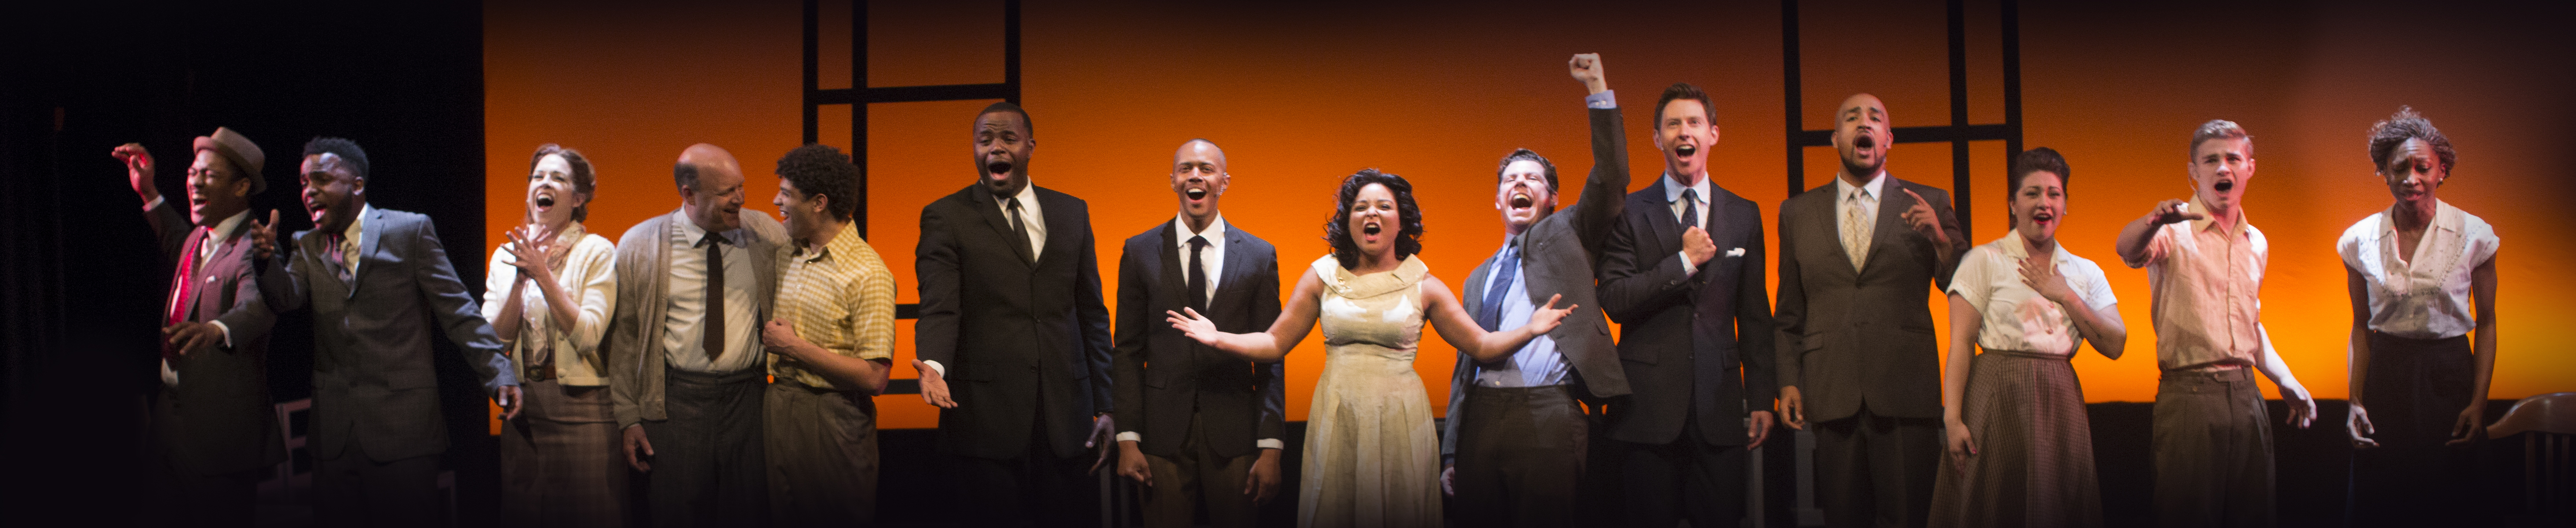 Freedom Riders: The Civil Rights Musical